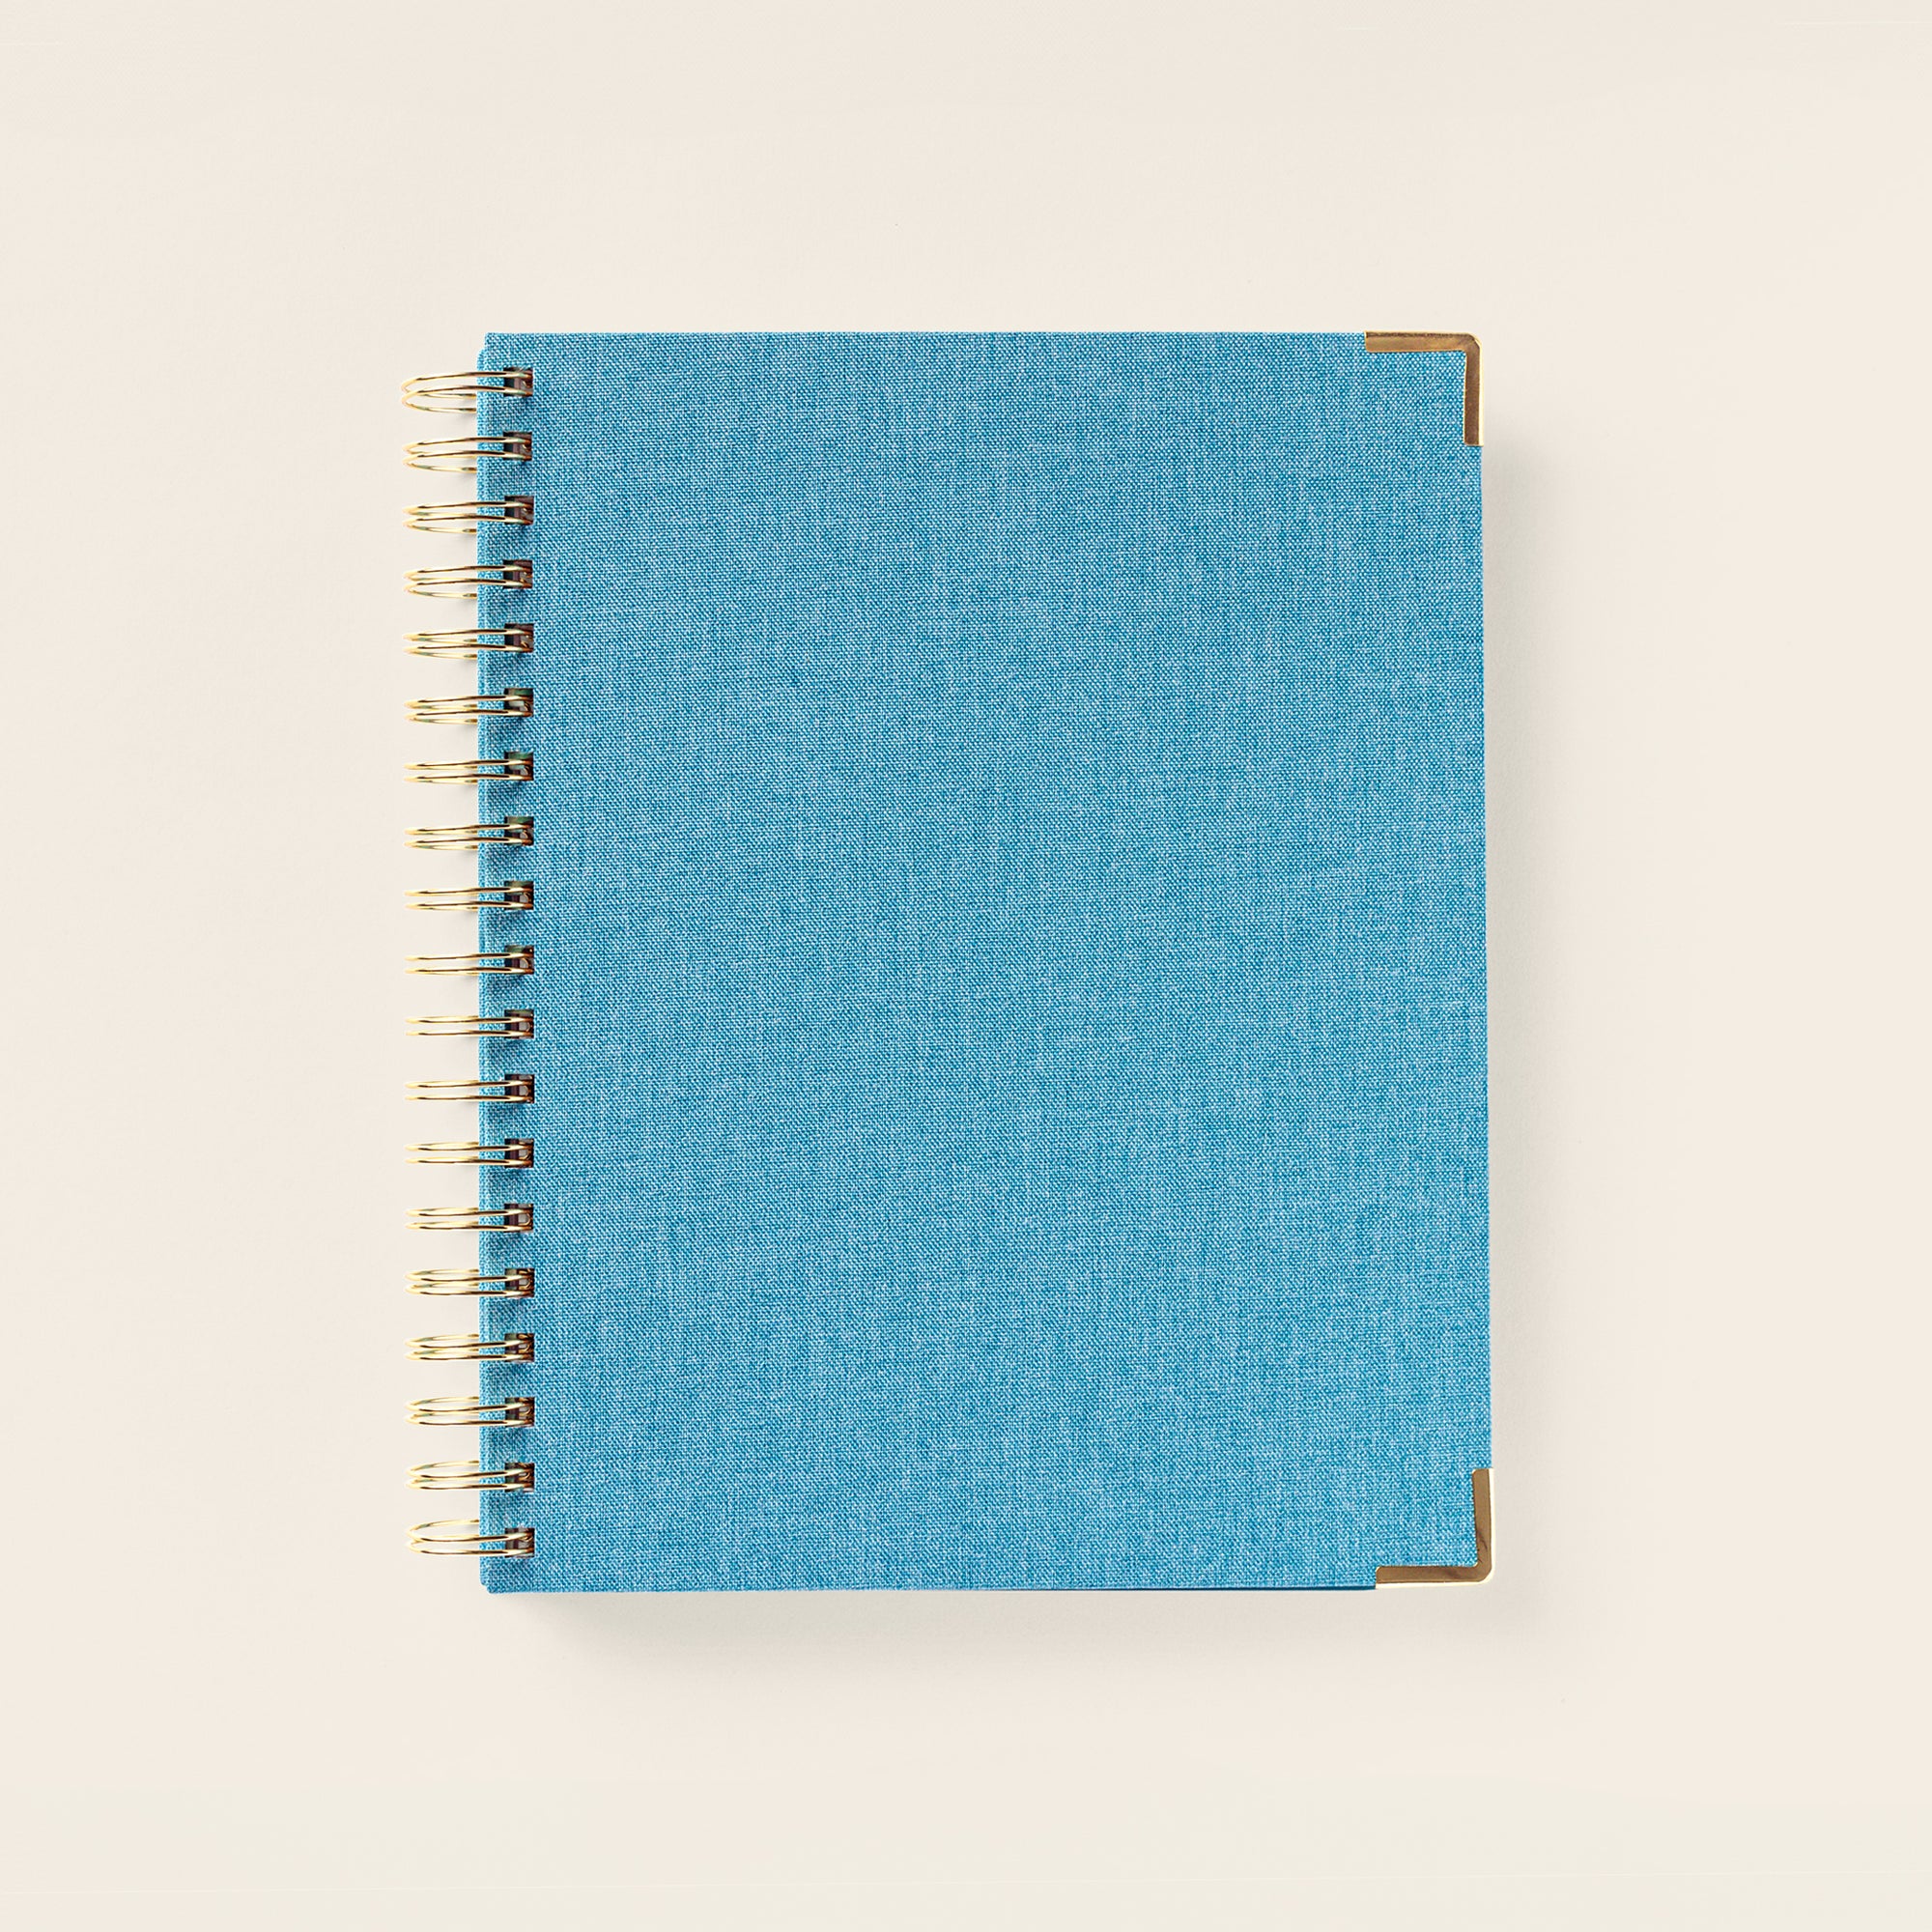 work planner, opened on cover image